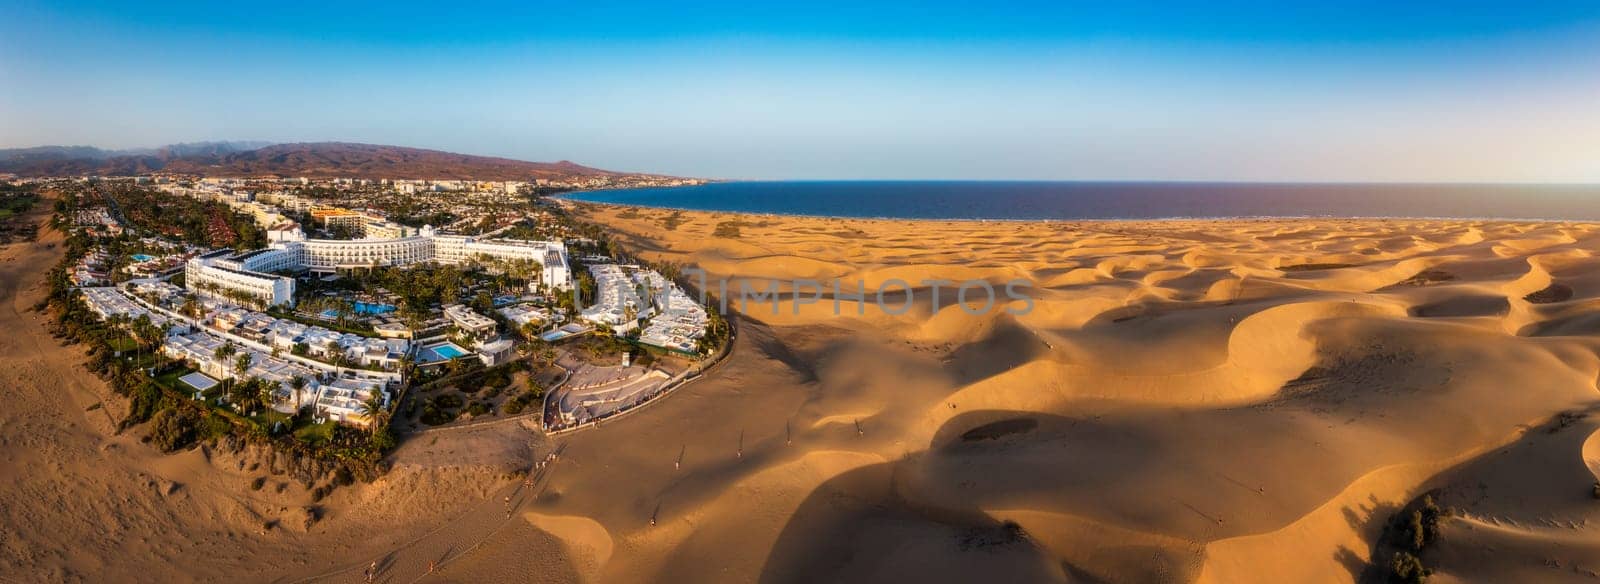 Landscape with Maspalomas town and golden sand dunes, Gran Canaria, Canary Islands, Spain. Natural Reserve of Dunes of Maspalomas, in Gran Canaria, Canary Islands, Spain. by DaLiu